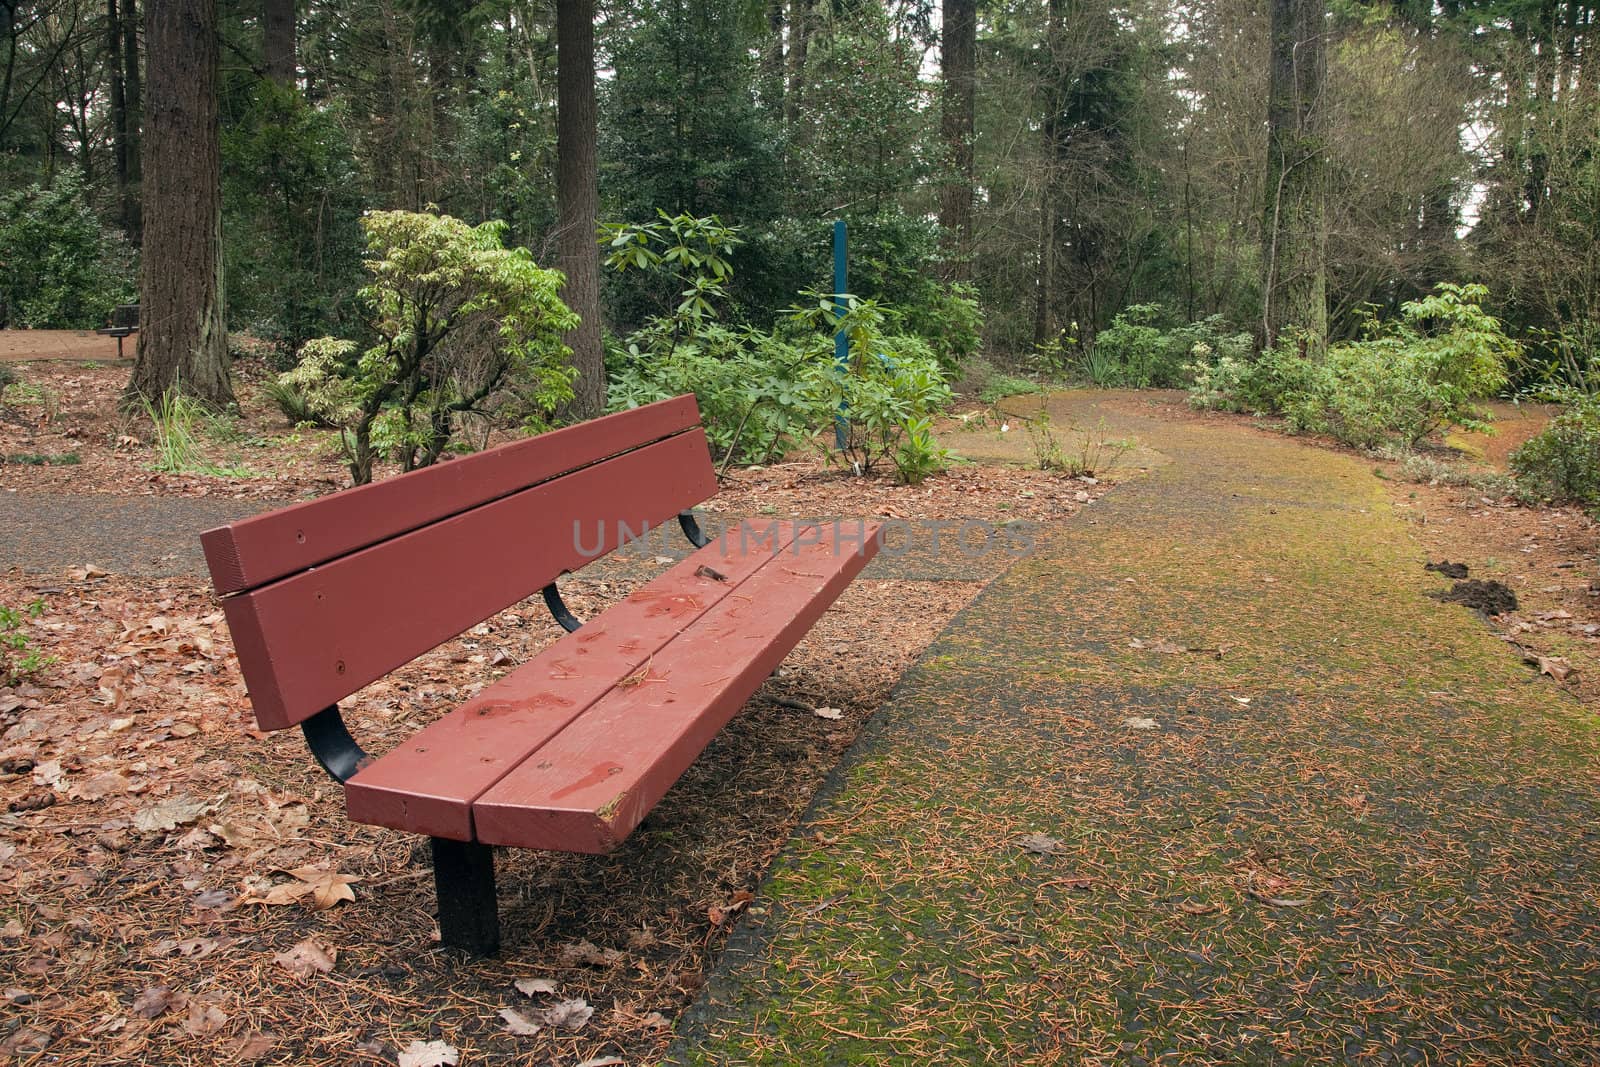 Bench and trail in a park in Portland OR.